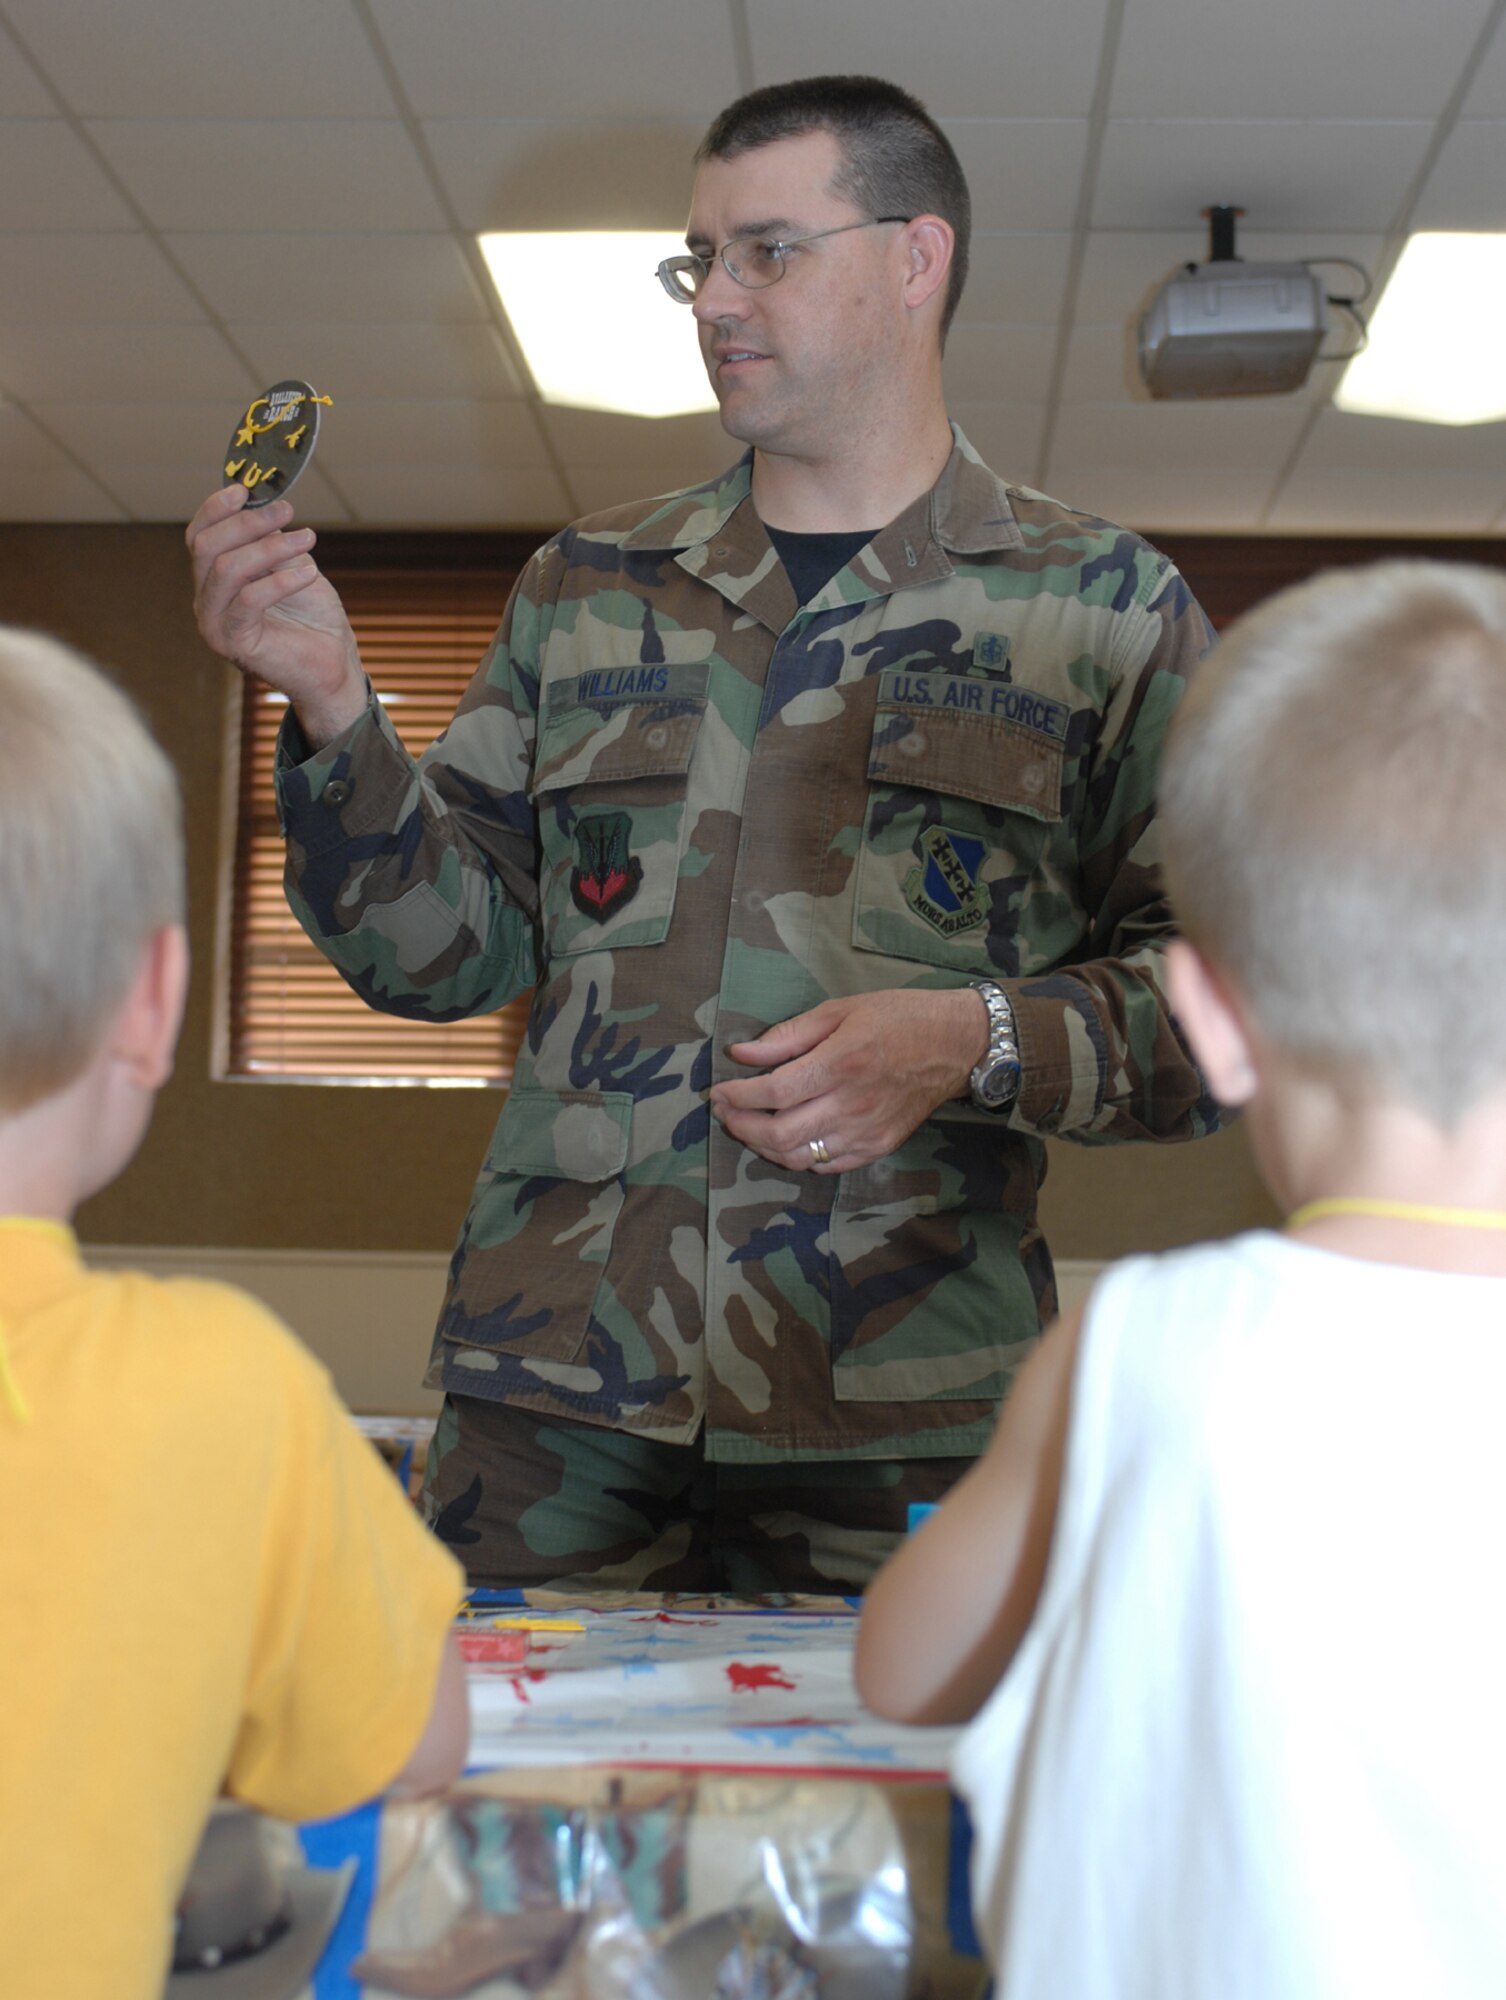 DYESS AIR FORCE BASE, Texas -- Tech. Sgt. Jack Williams, 7th Medical Group, teaches children at the base chapel's Vacation Bible School how to make the craft of the day June 6. (U.S. Air Force photo by Airman First Class Jennifer Romig)